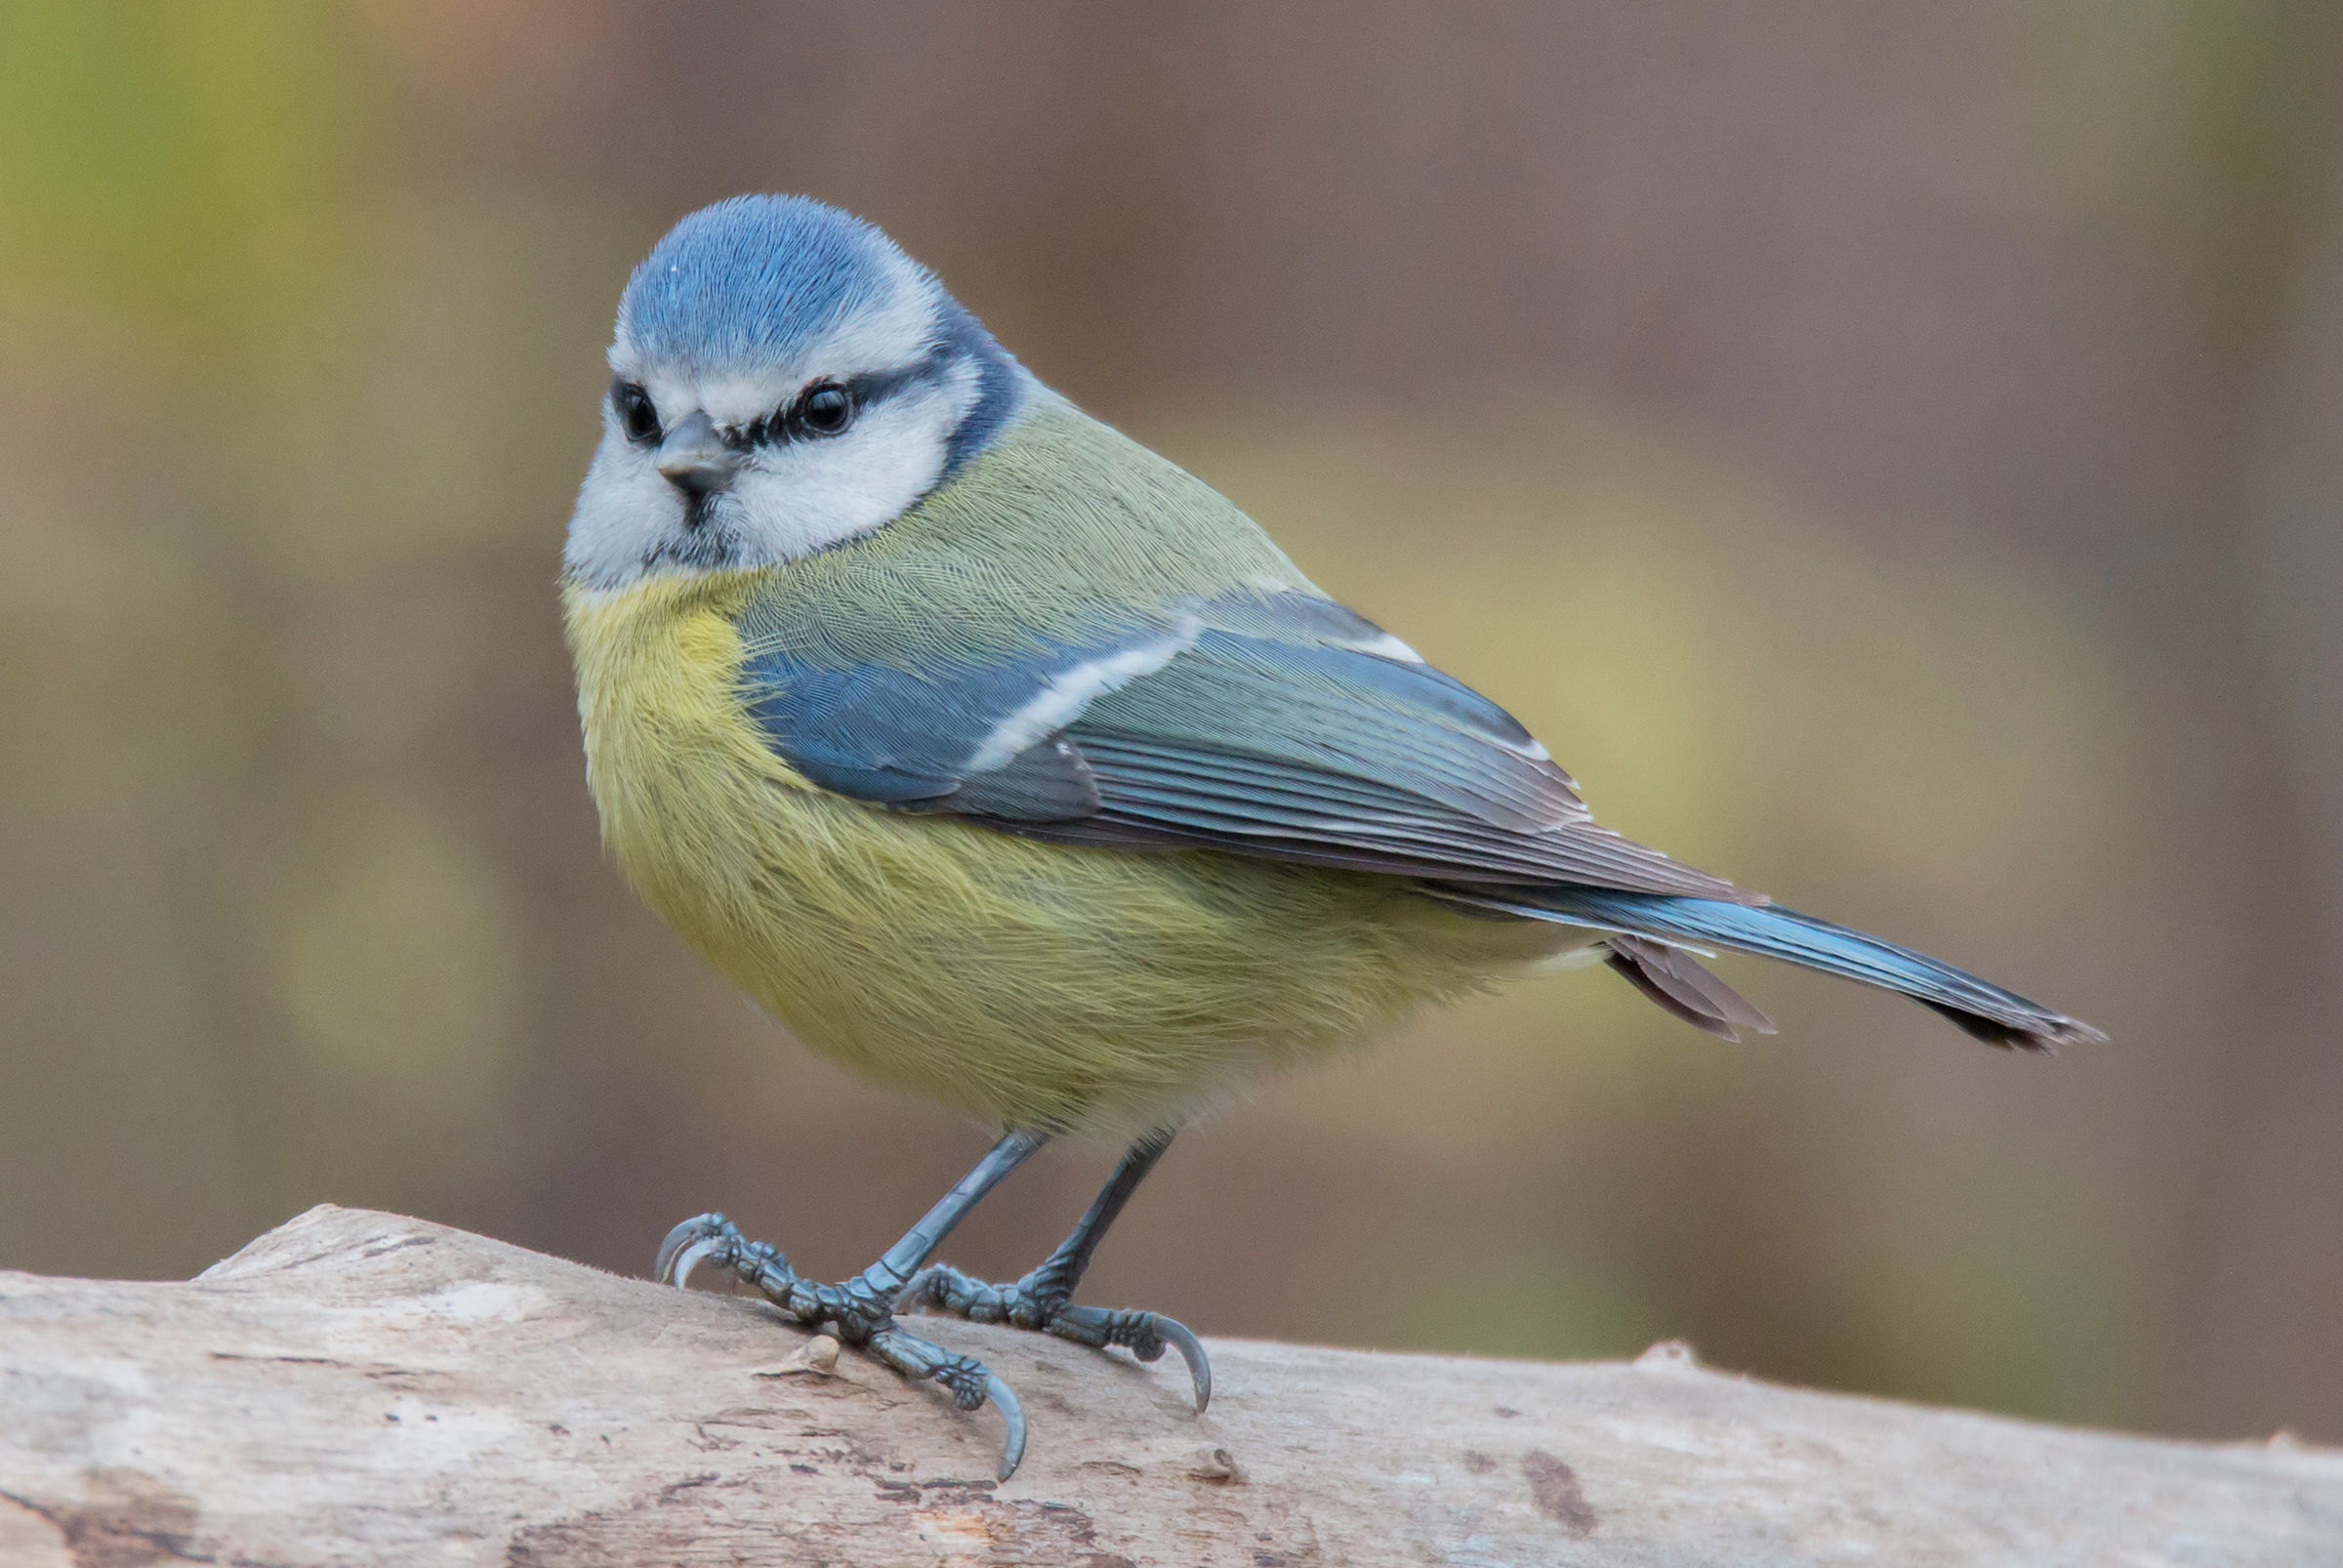 Observed by a blue tit...